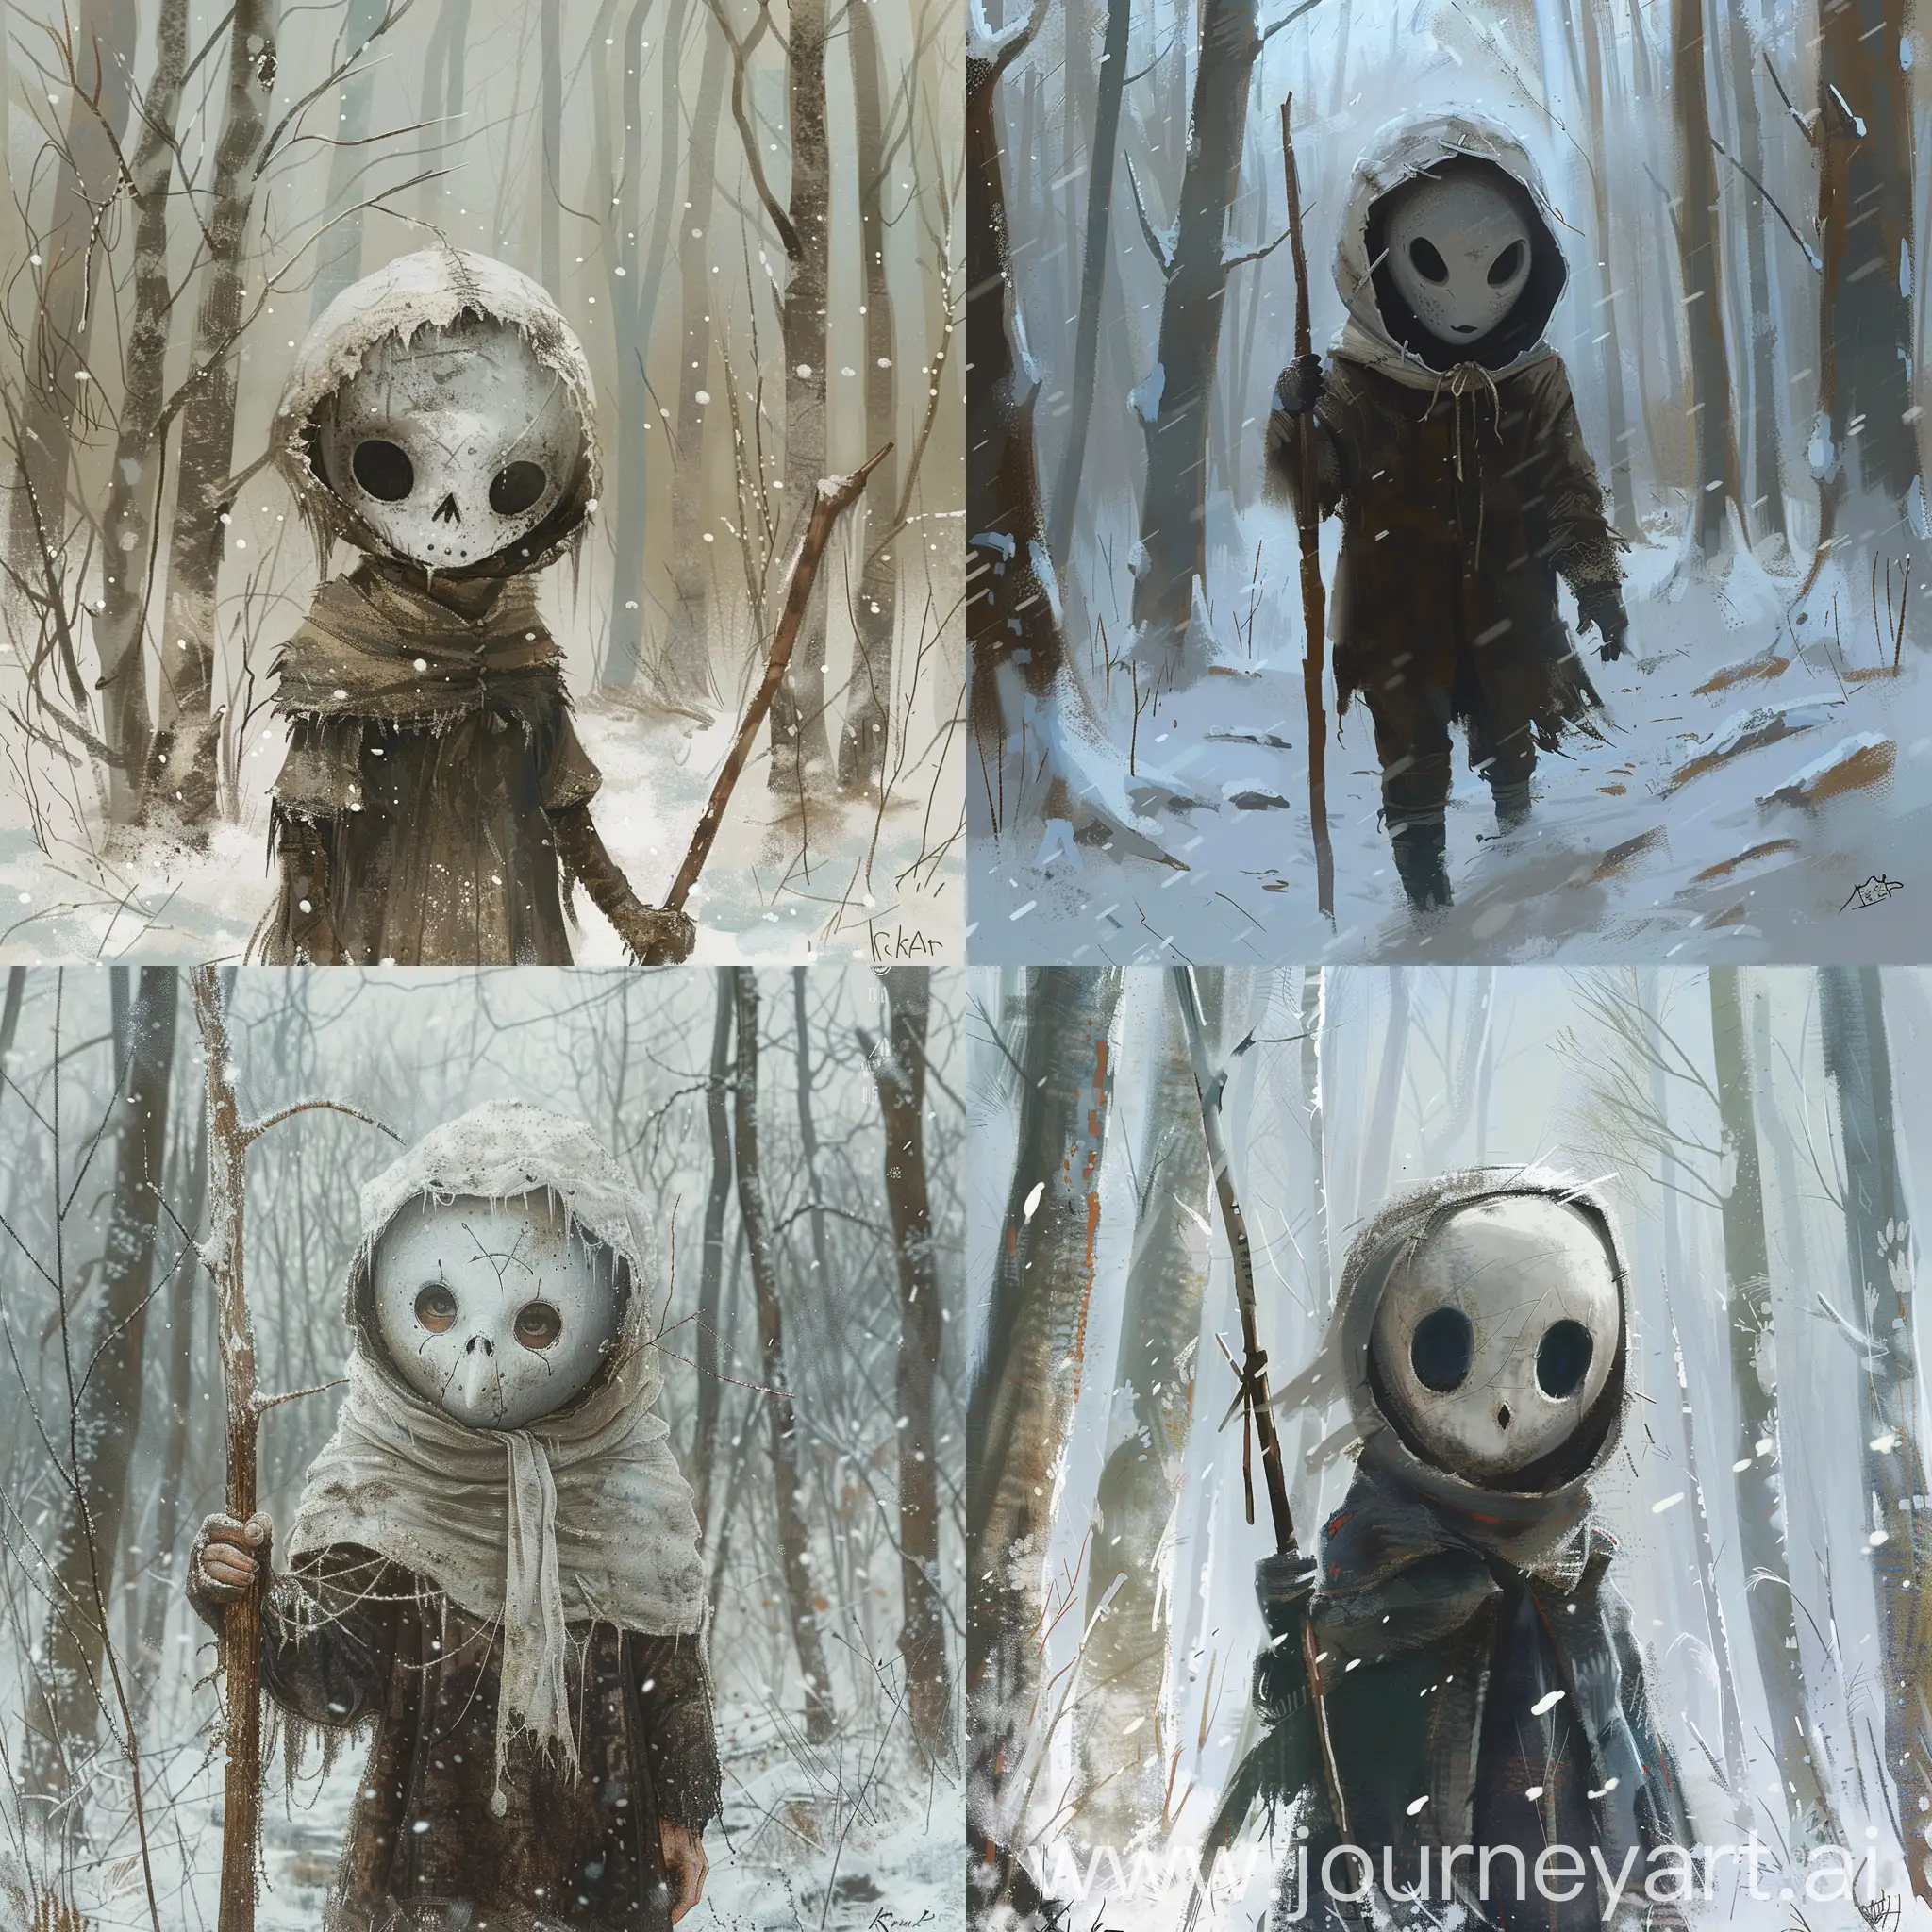 create an image inspired by a ircenrraat child in a wintry forest, the child wearing a white creepy mask and holding a stick